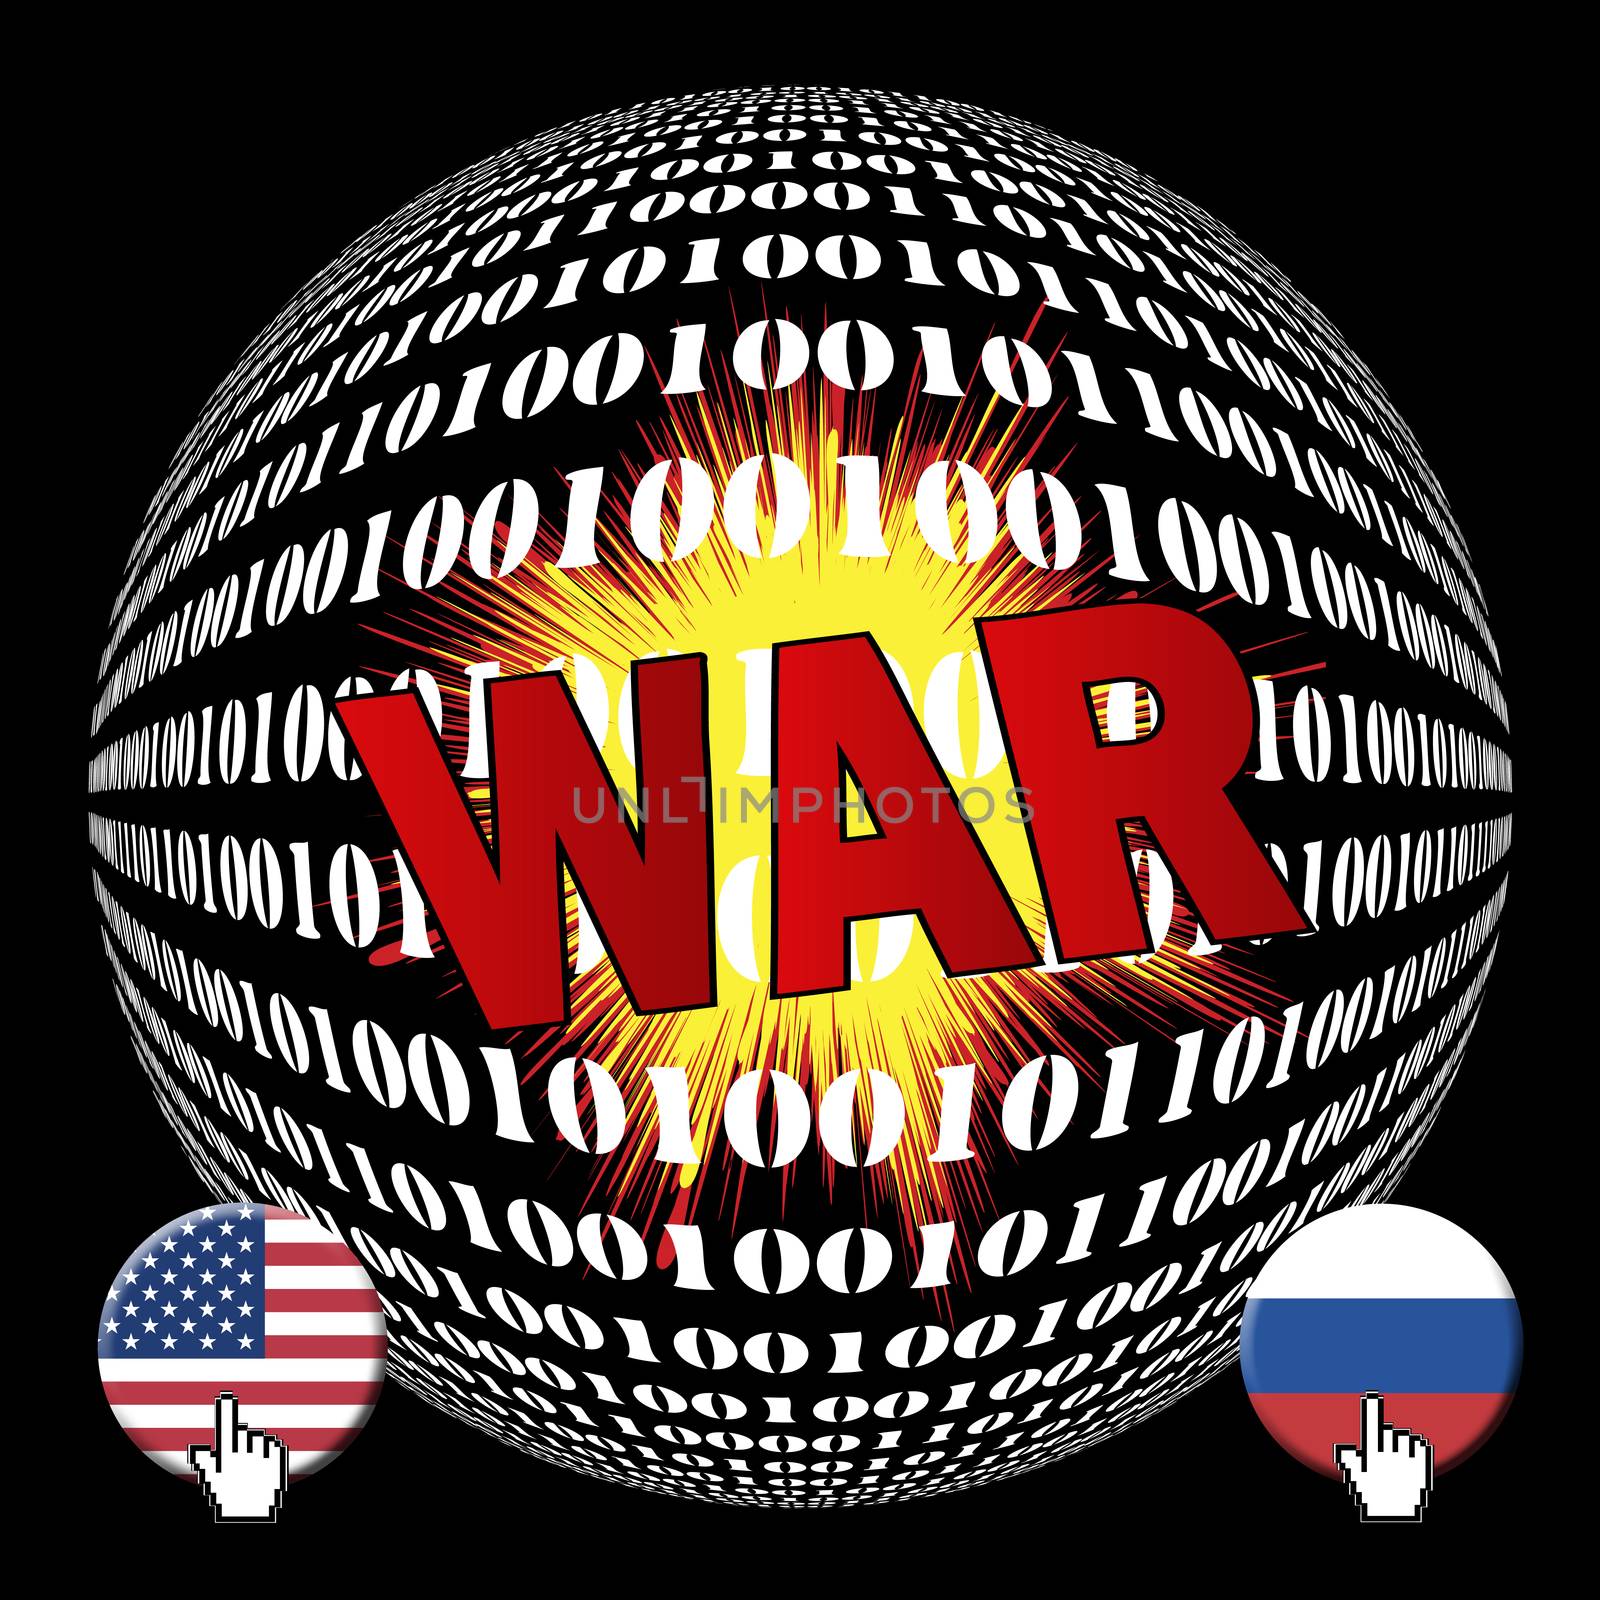 Future war between America and Russia on the internet